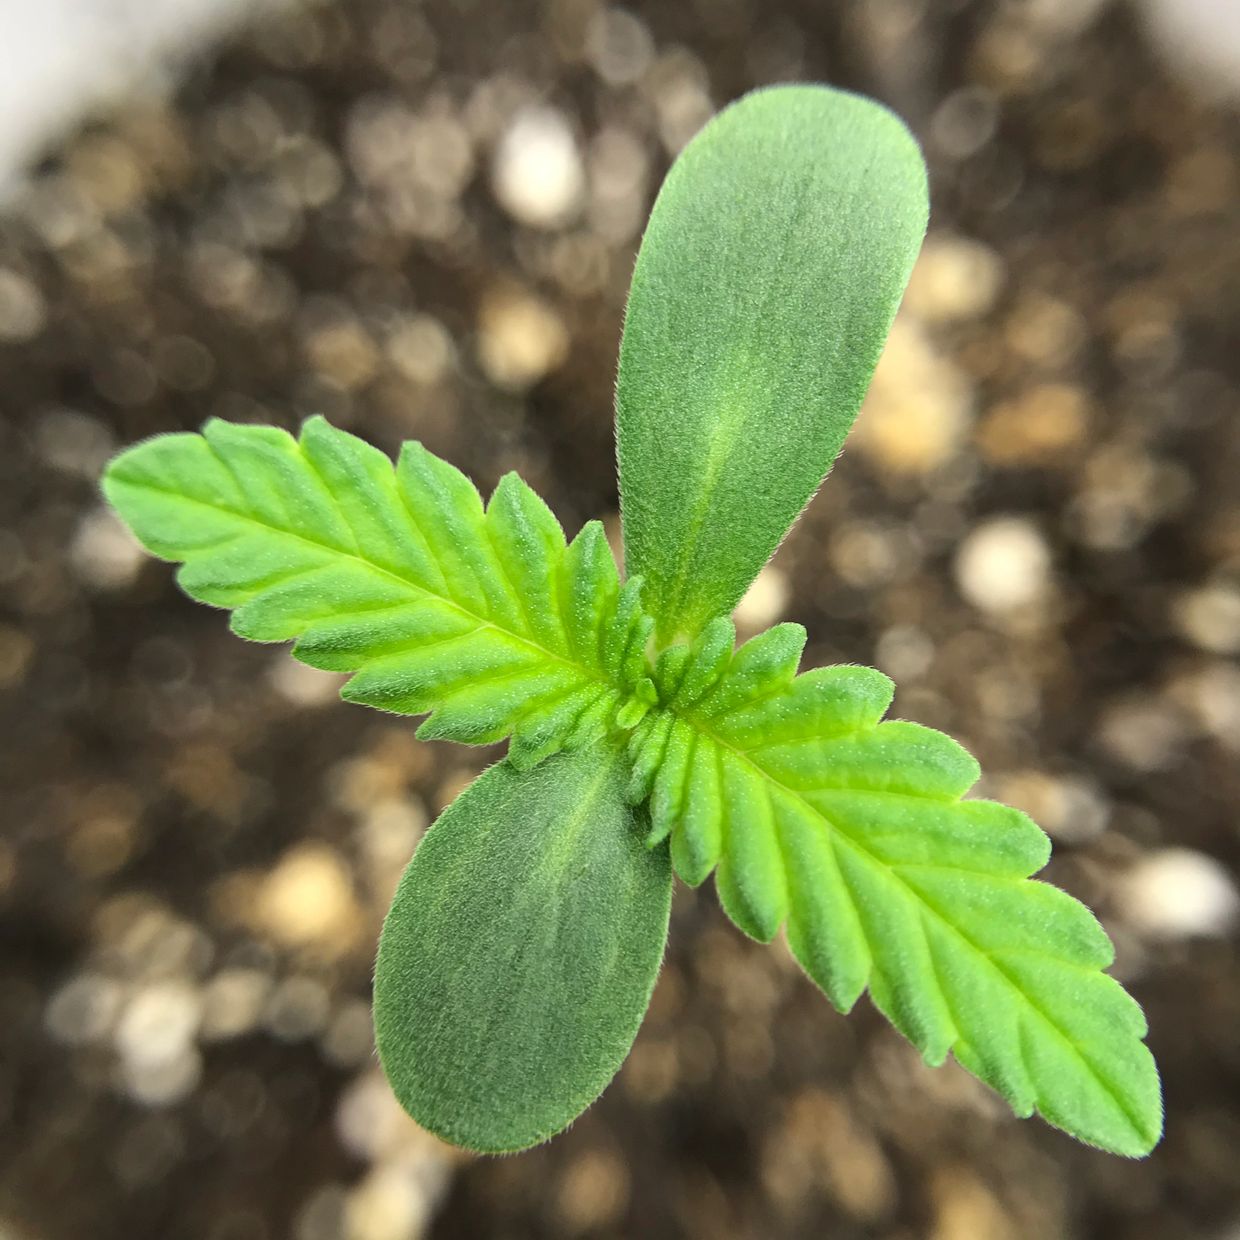 Top view close-up of a single young Chola seedling